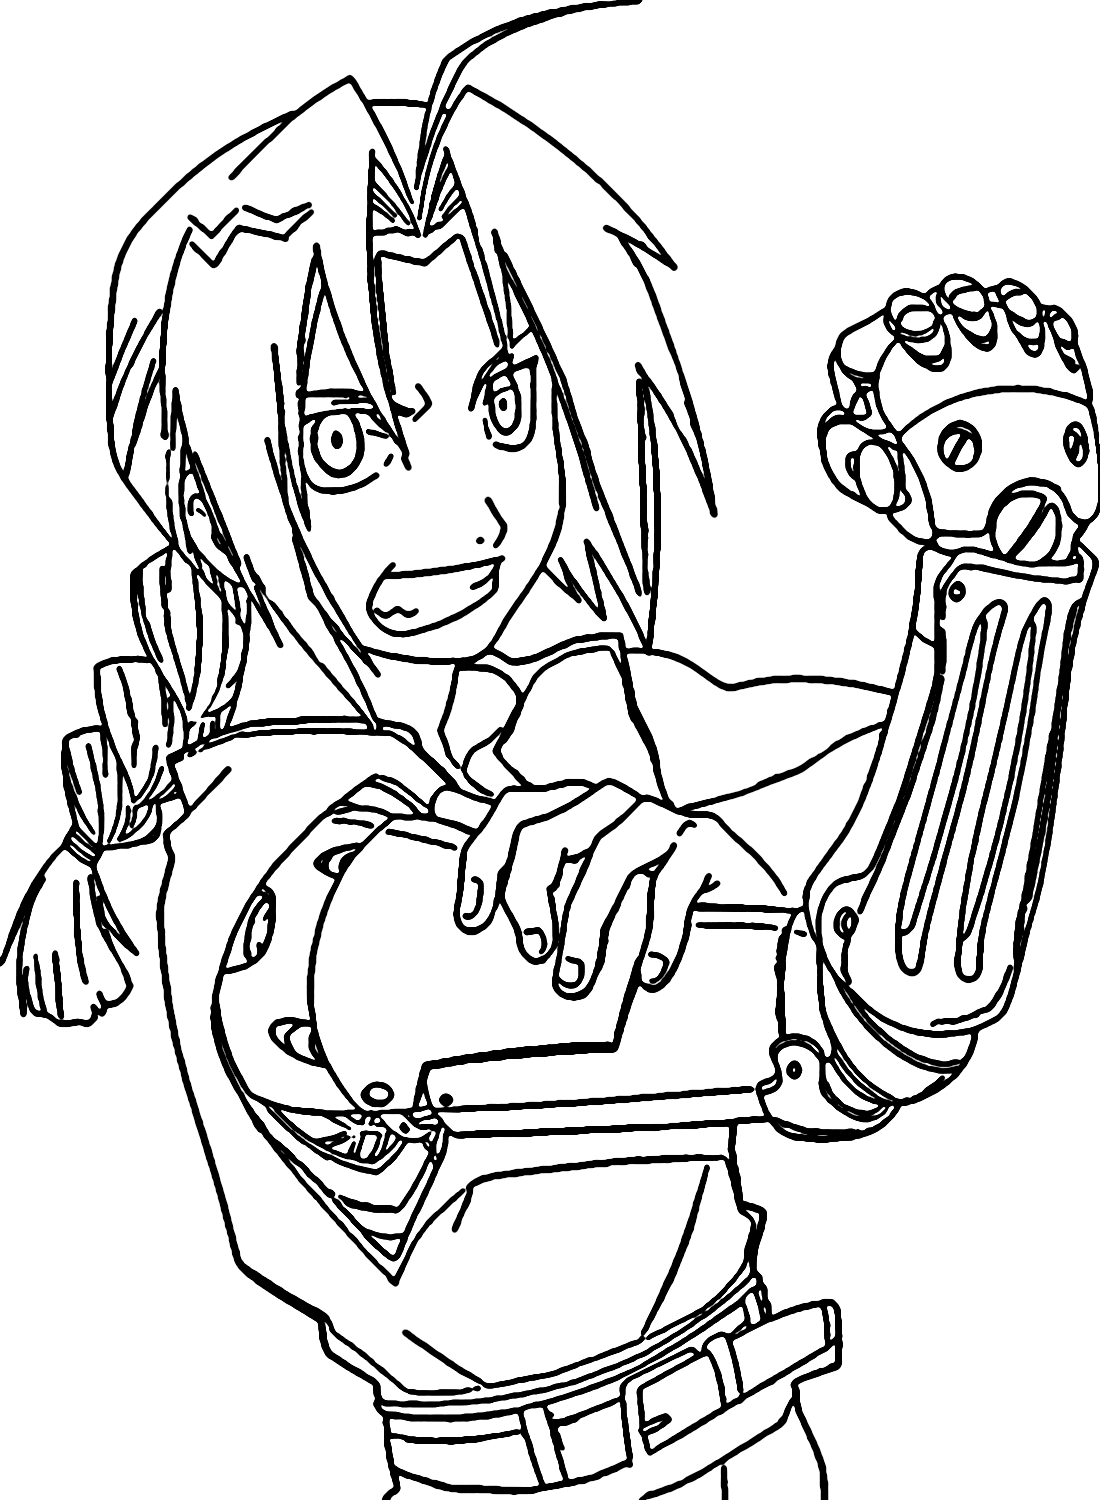 Strong Edward Elric Coloring Pages